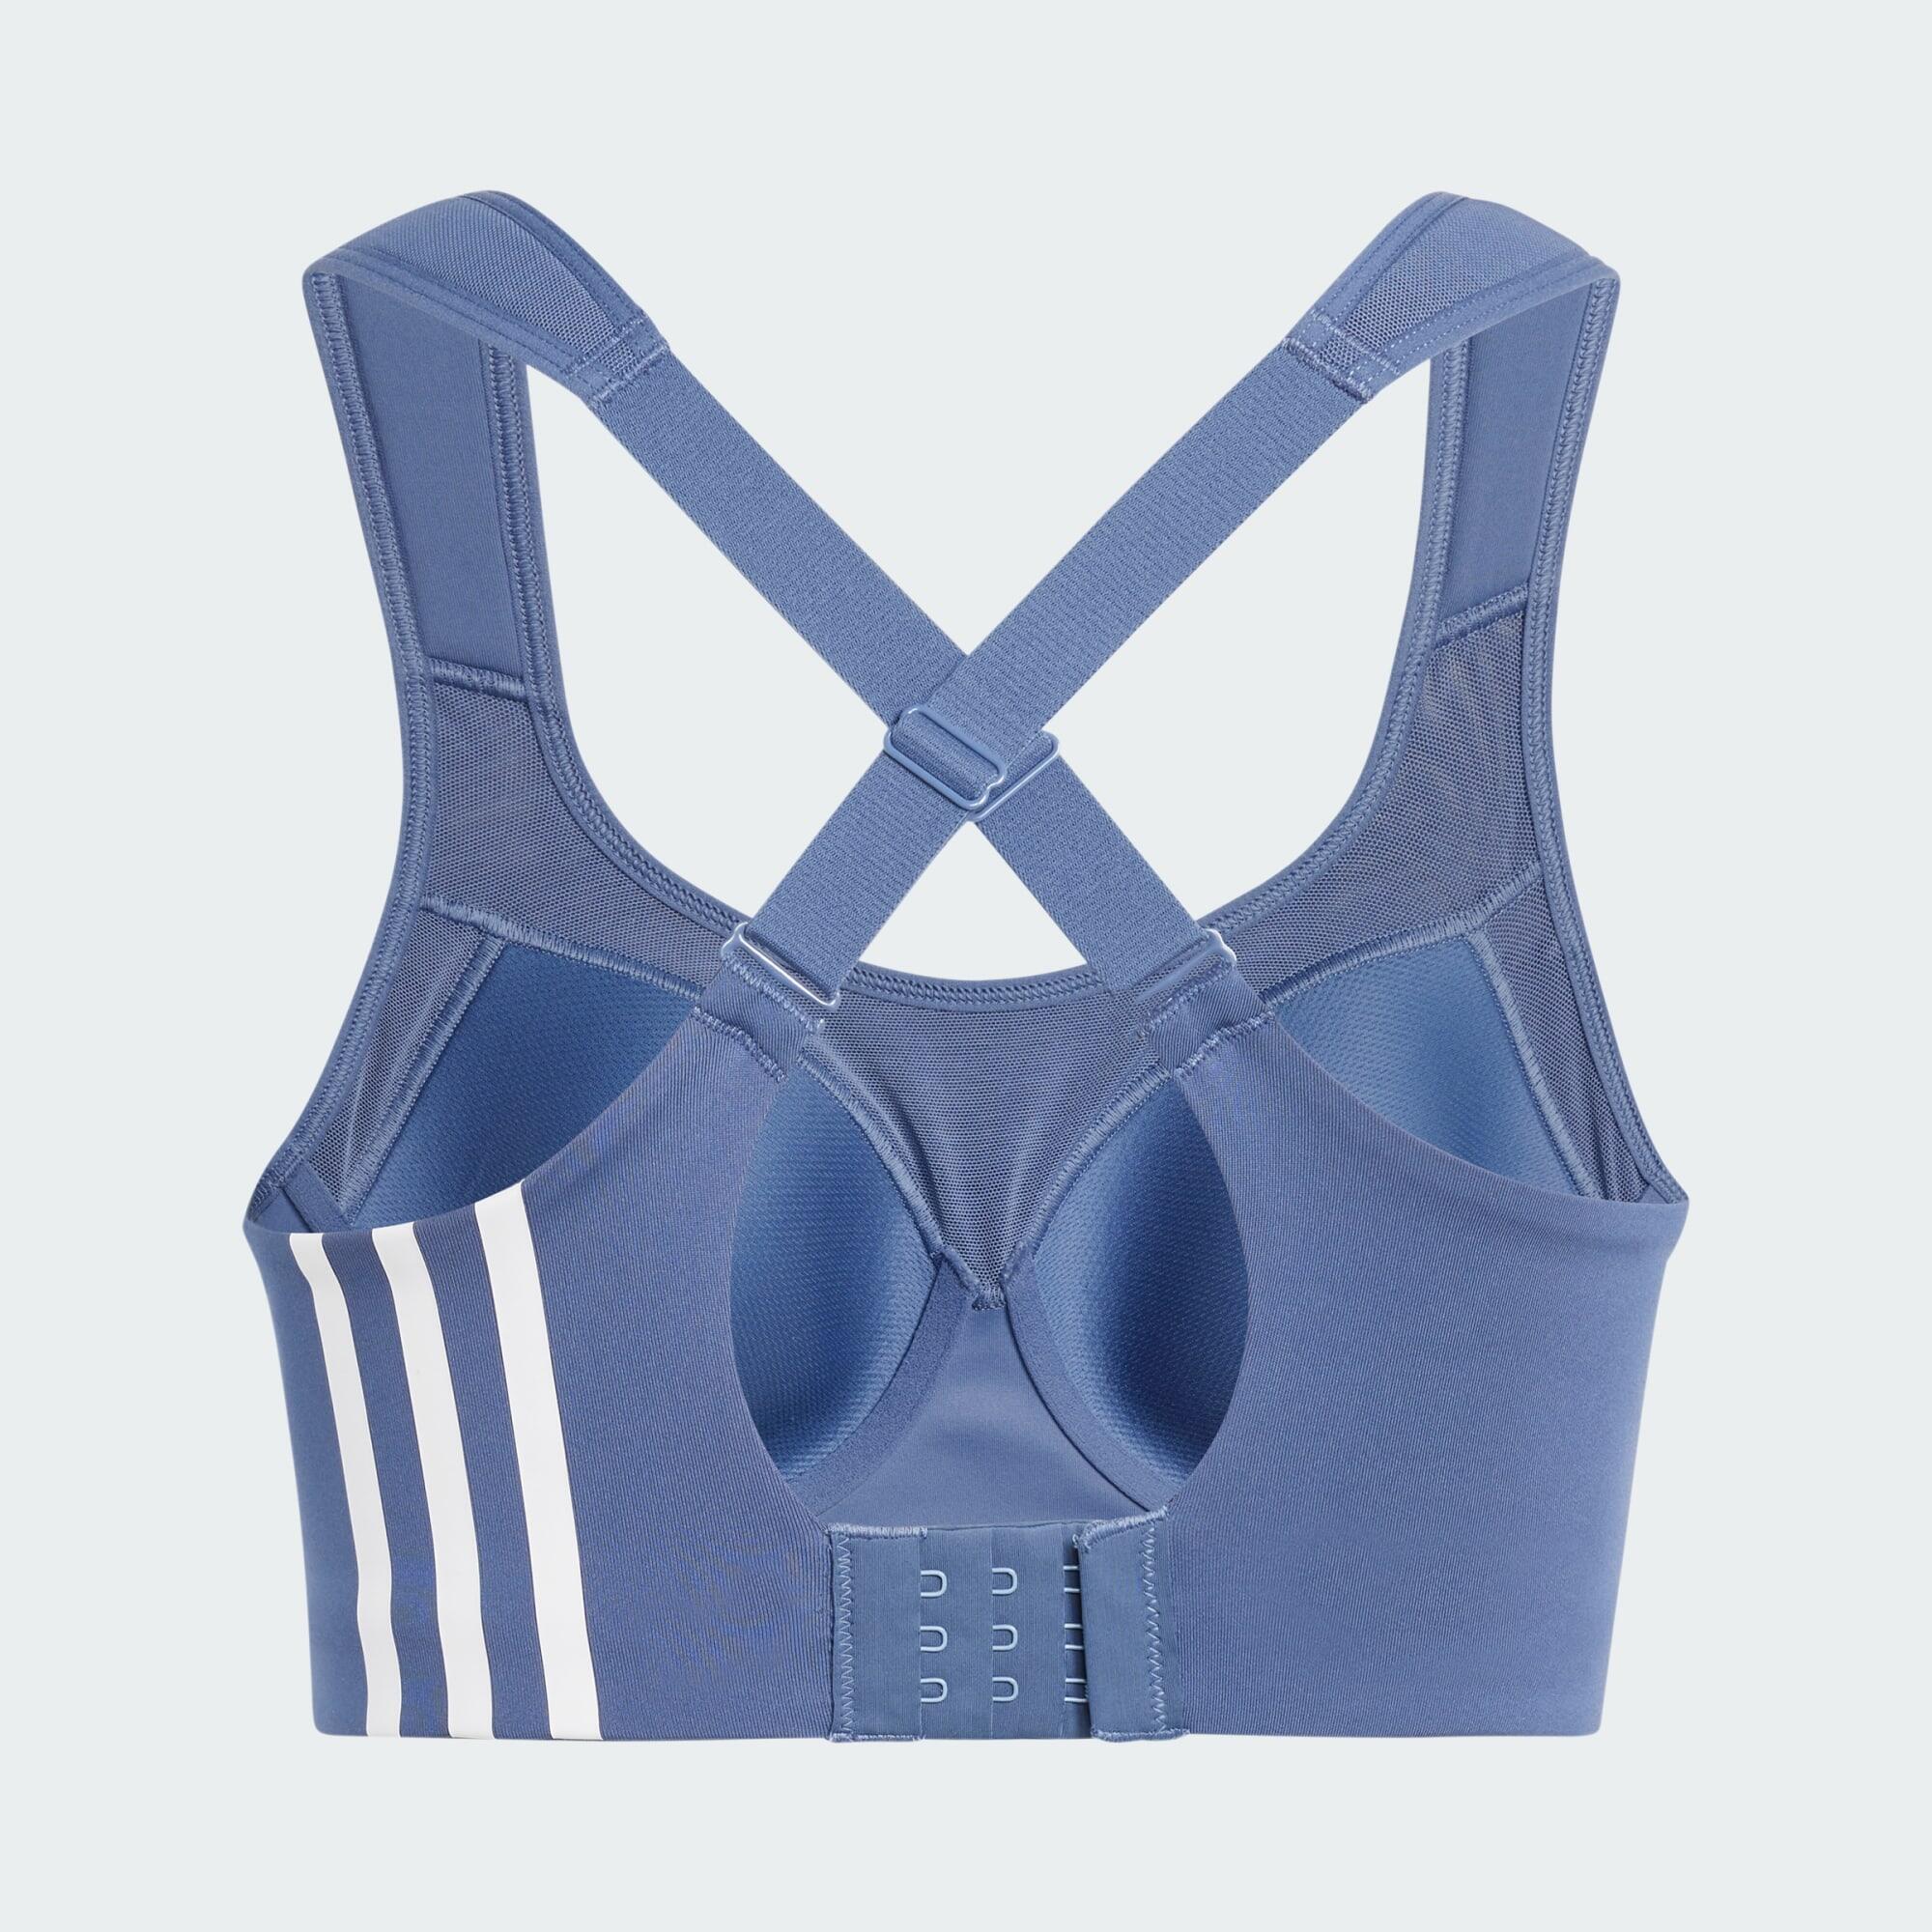 TLRD Impact Training High-Support Bra 6/6